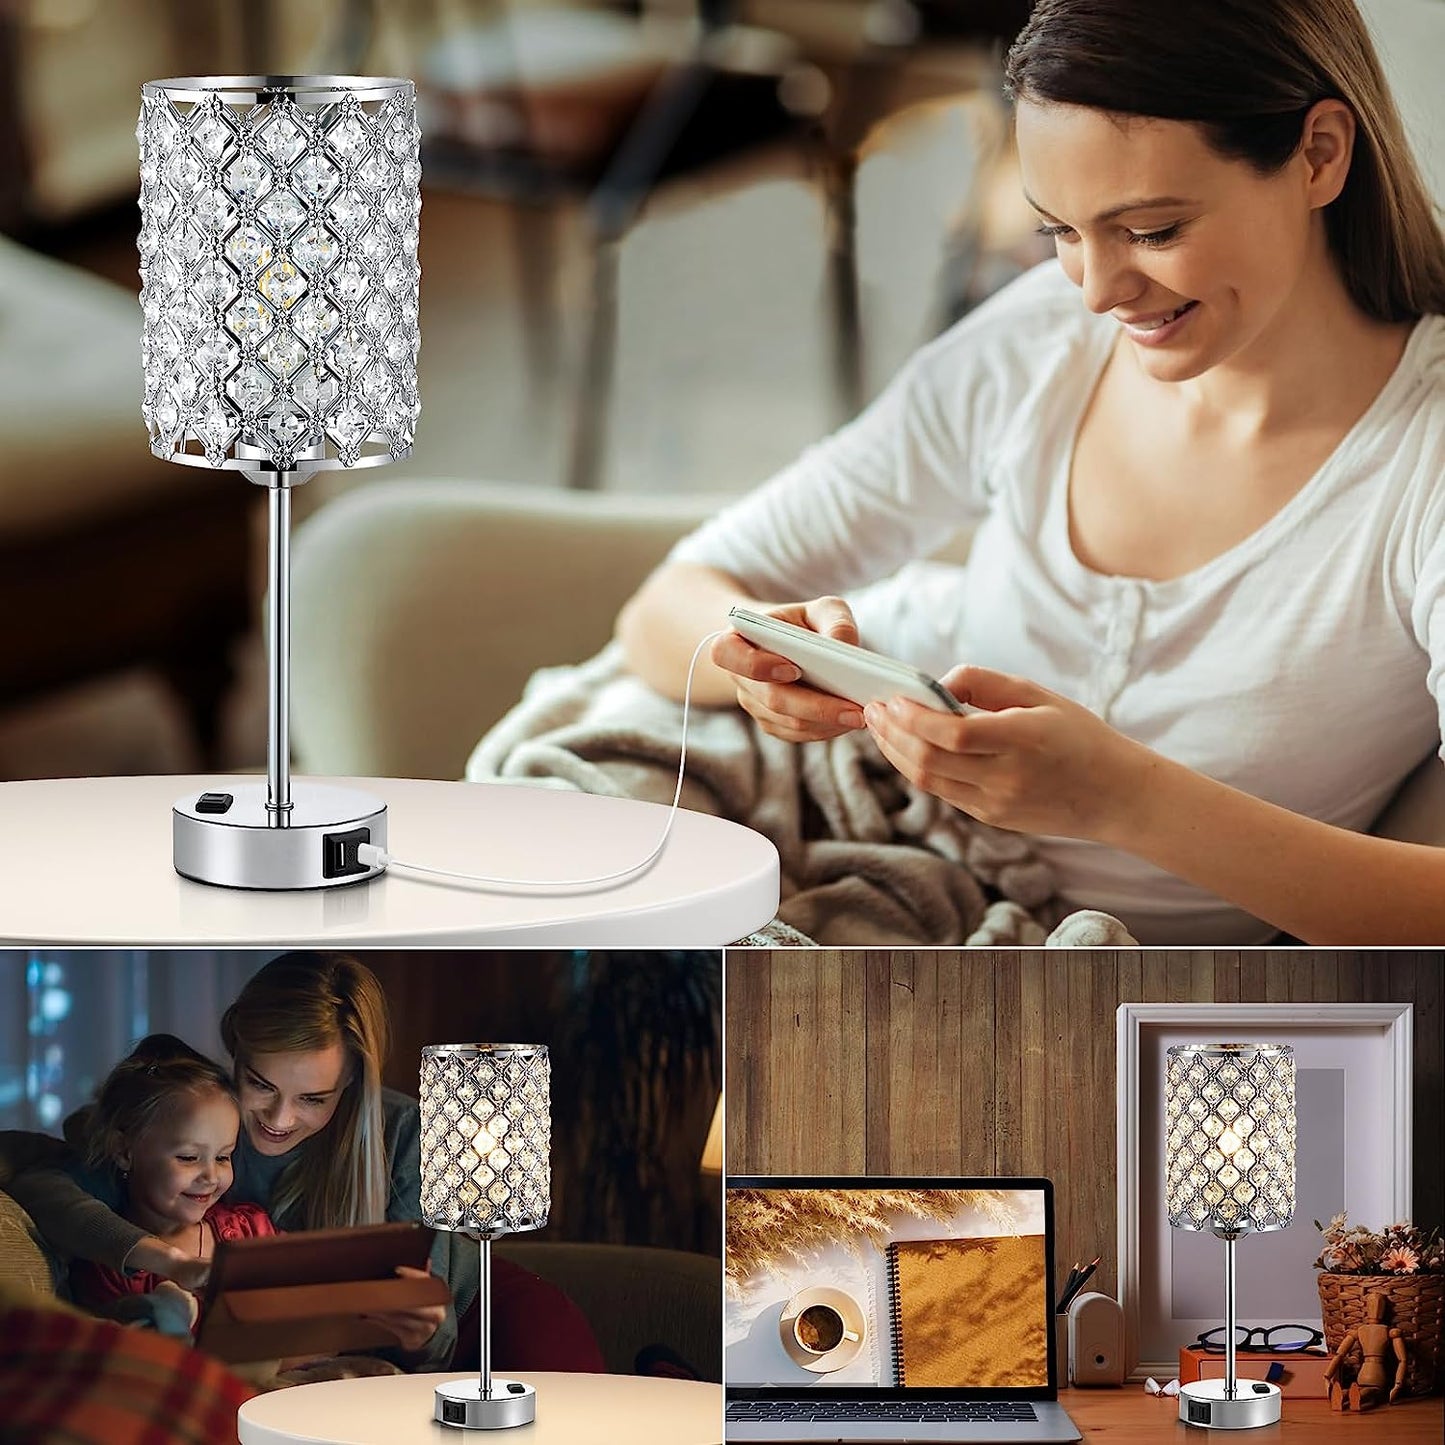 Table Lamps Set of 2-Crystal Table Lamp with USB C+A Ports & AC Outlet Sliver (LED Bulb Included)